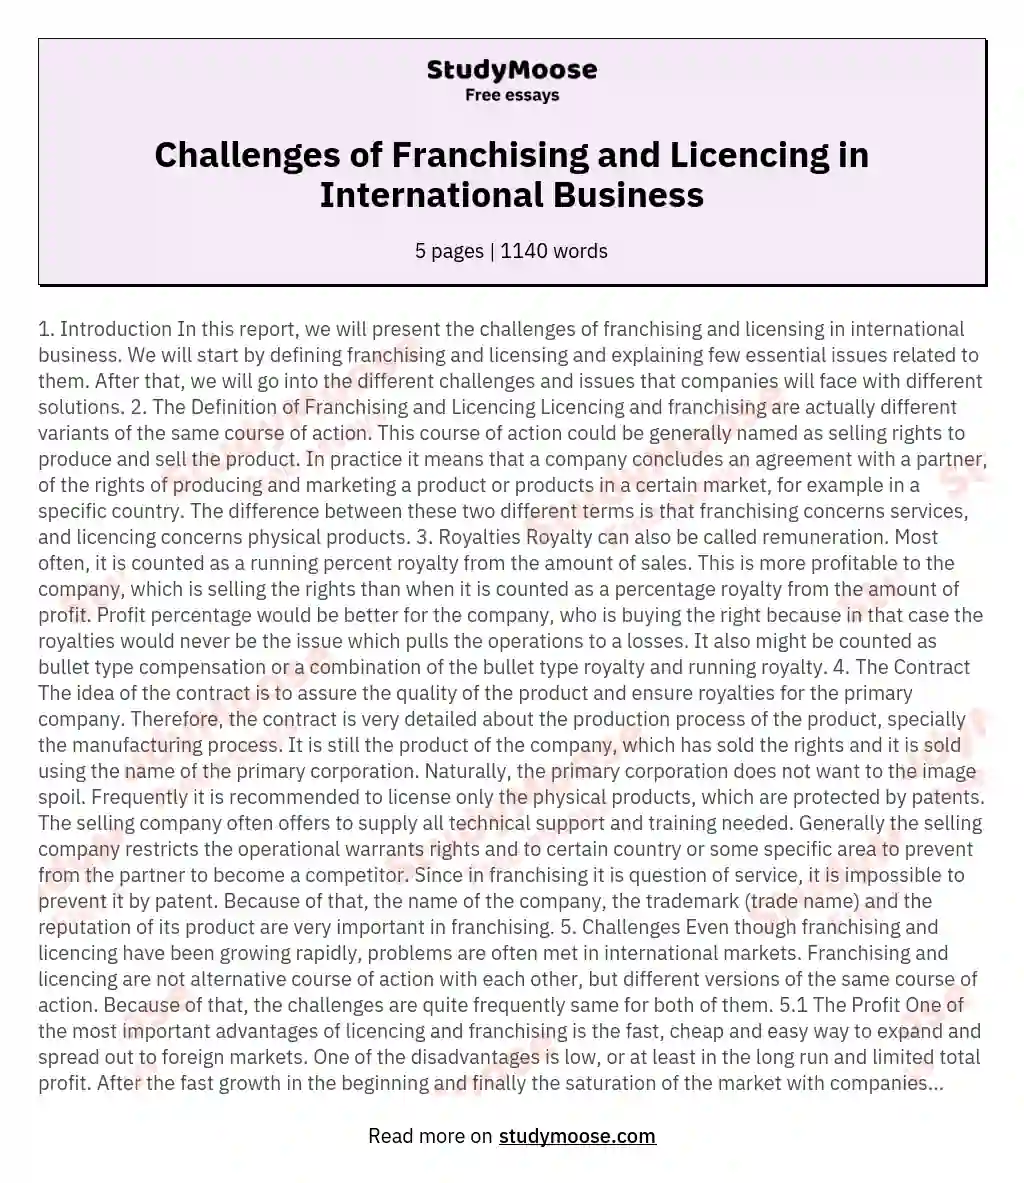 Challenges of Franchising and Licencing in International Business essay